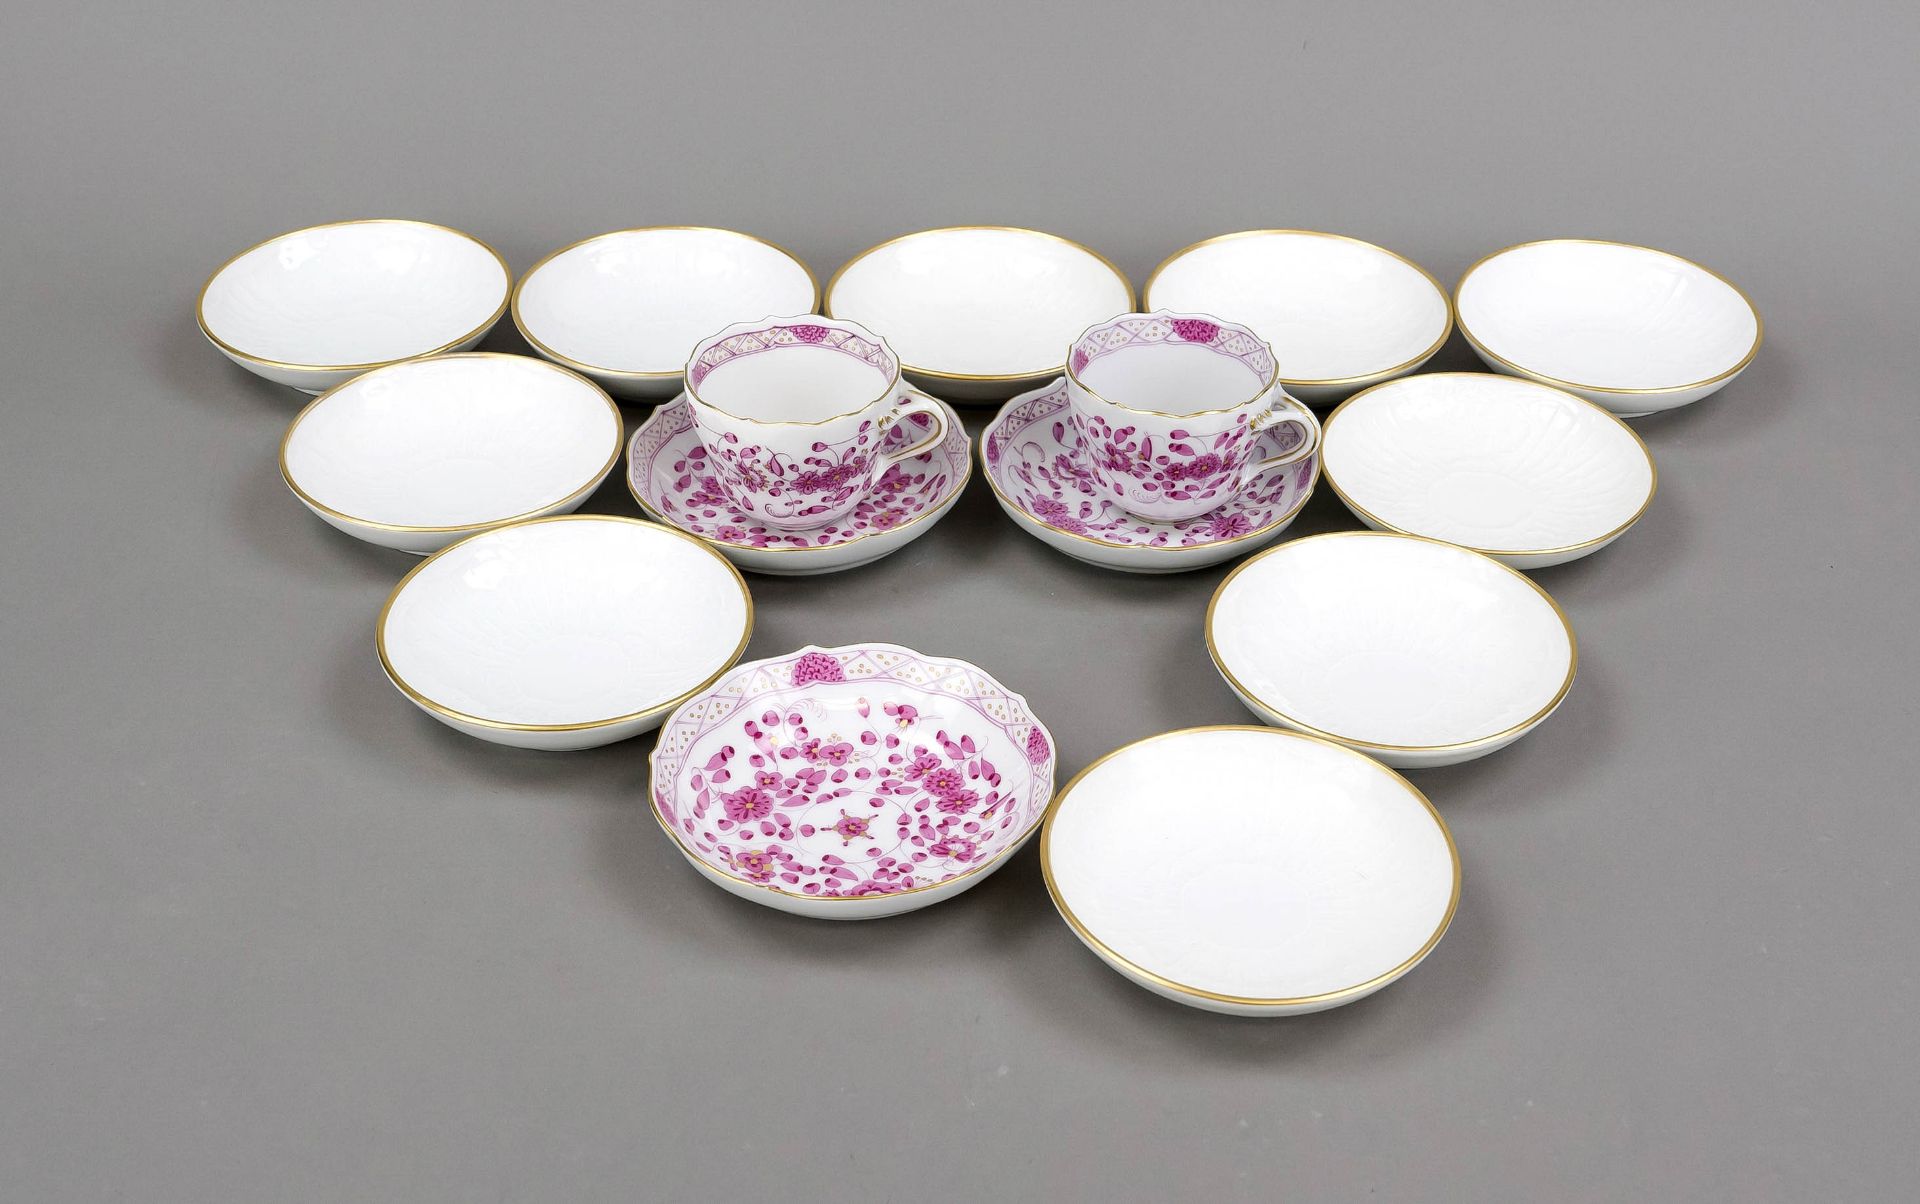 Mixed lot of 15 pieces, 10 saucers, KPM Berlin, marks before 1962, 1st choice, red imperial orb